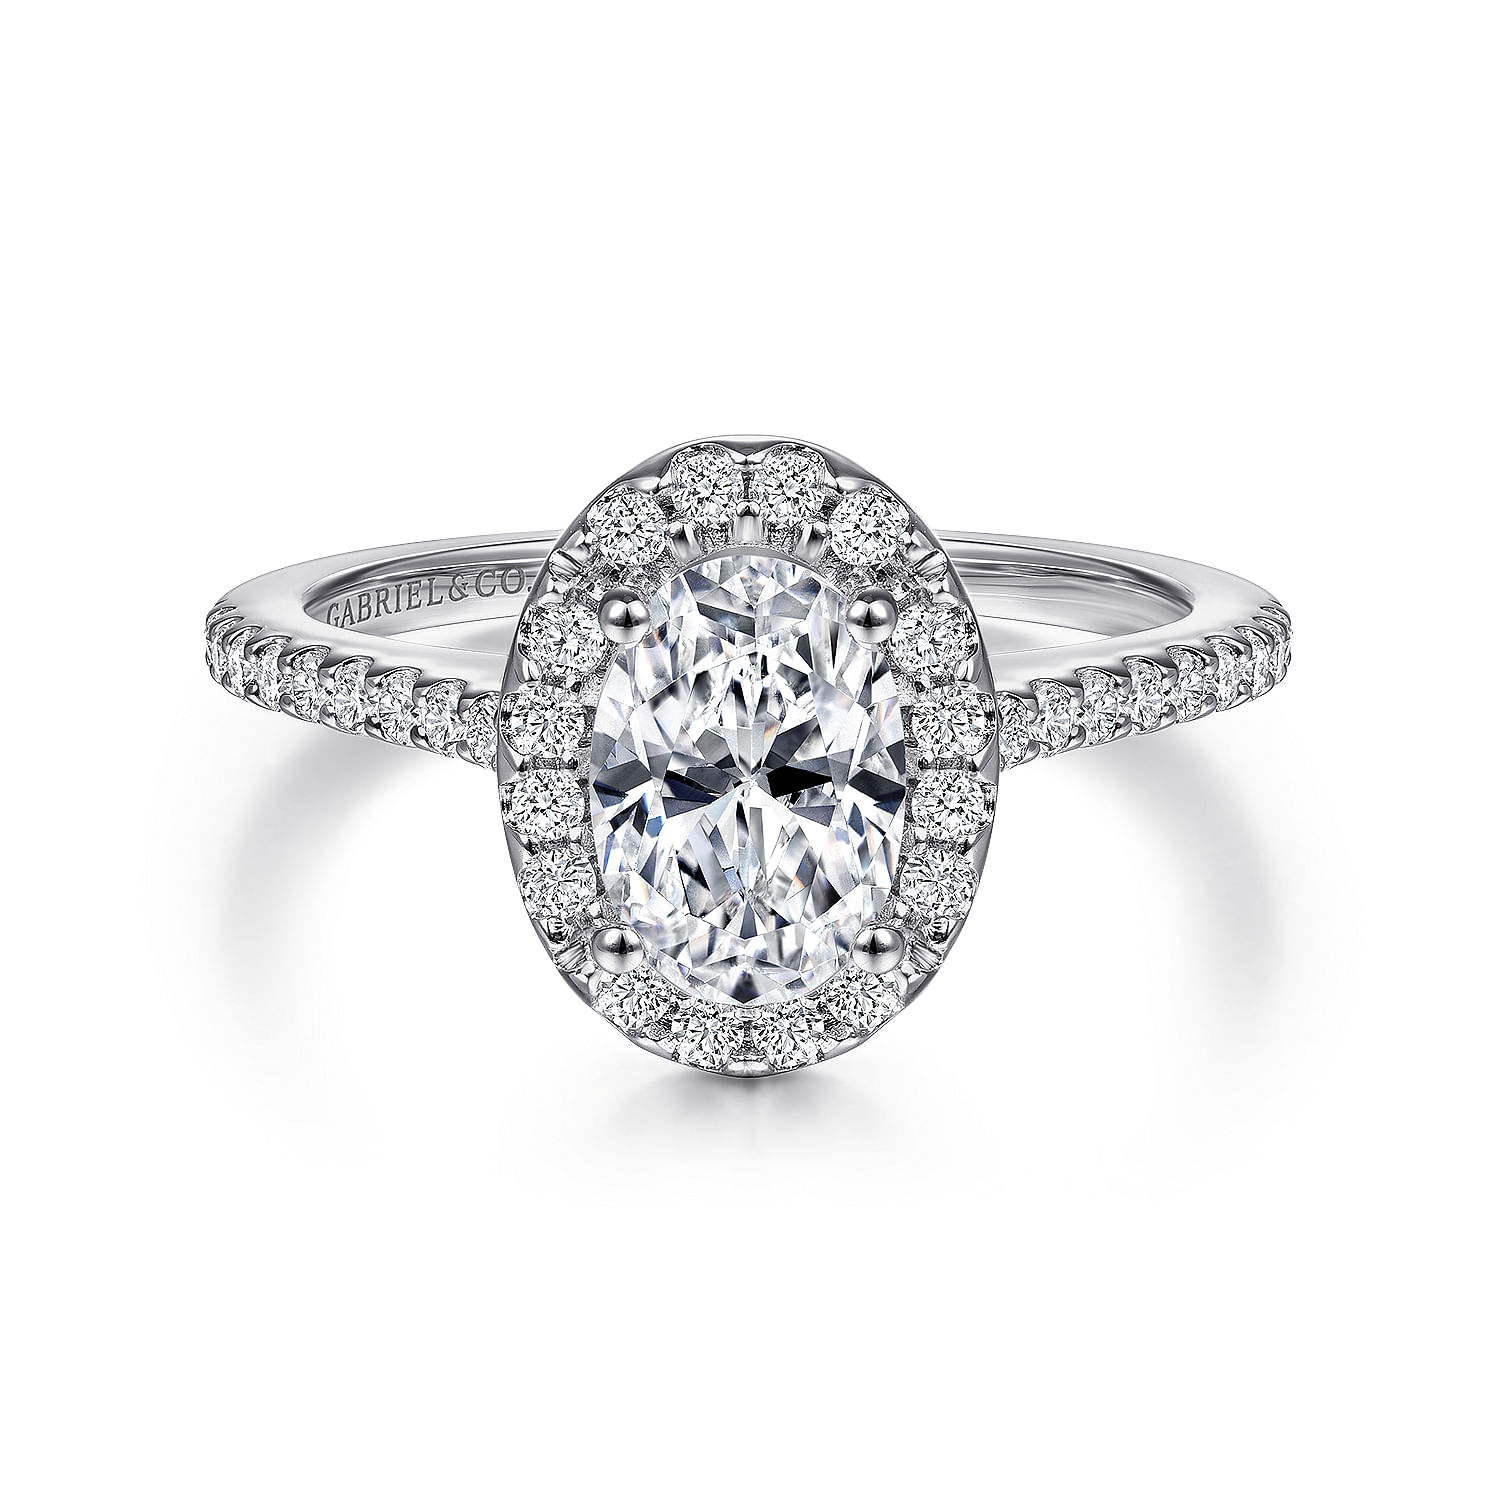 Carly---14K-White-Gold-Oval-Halo-Diamond-Engagement-Ring1